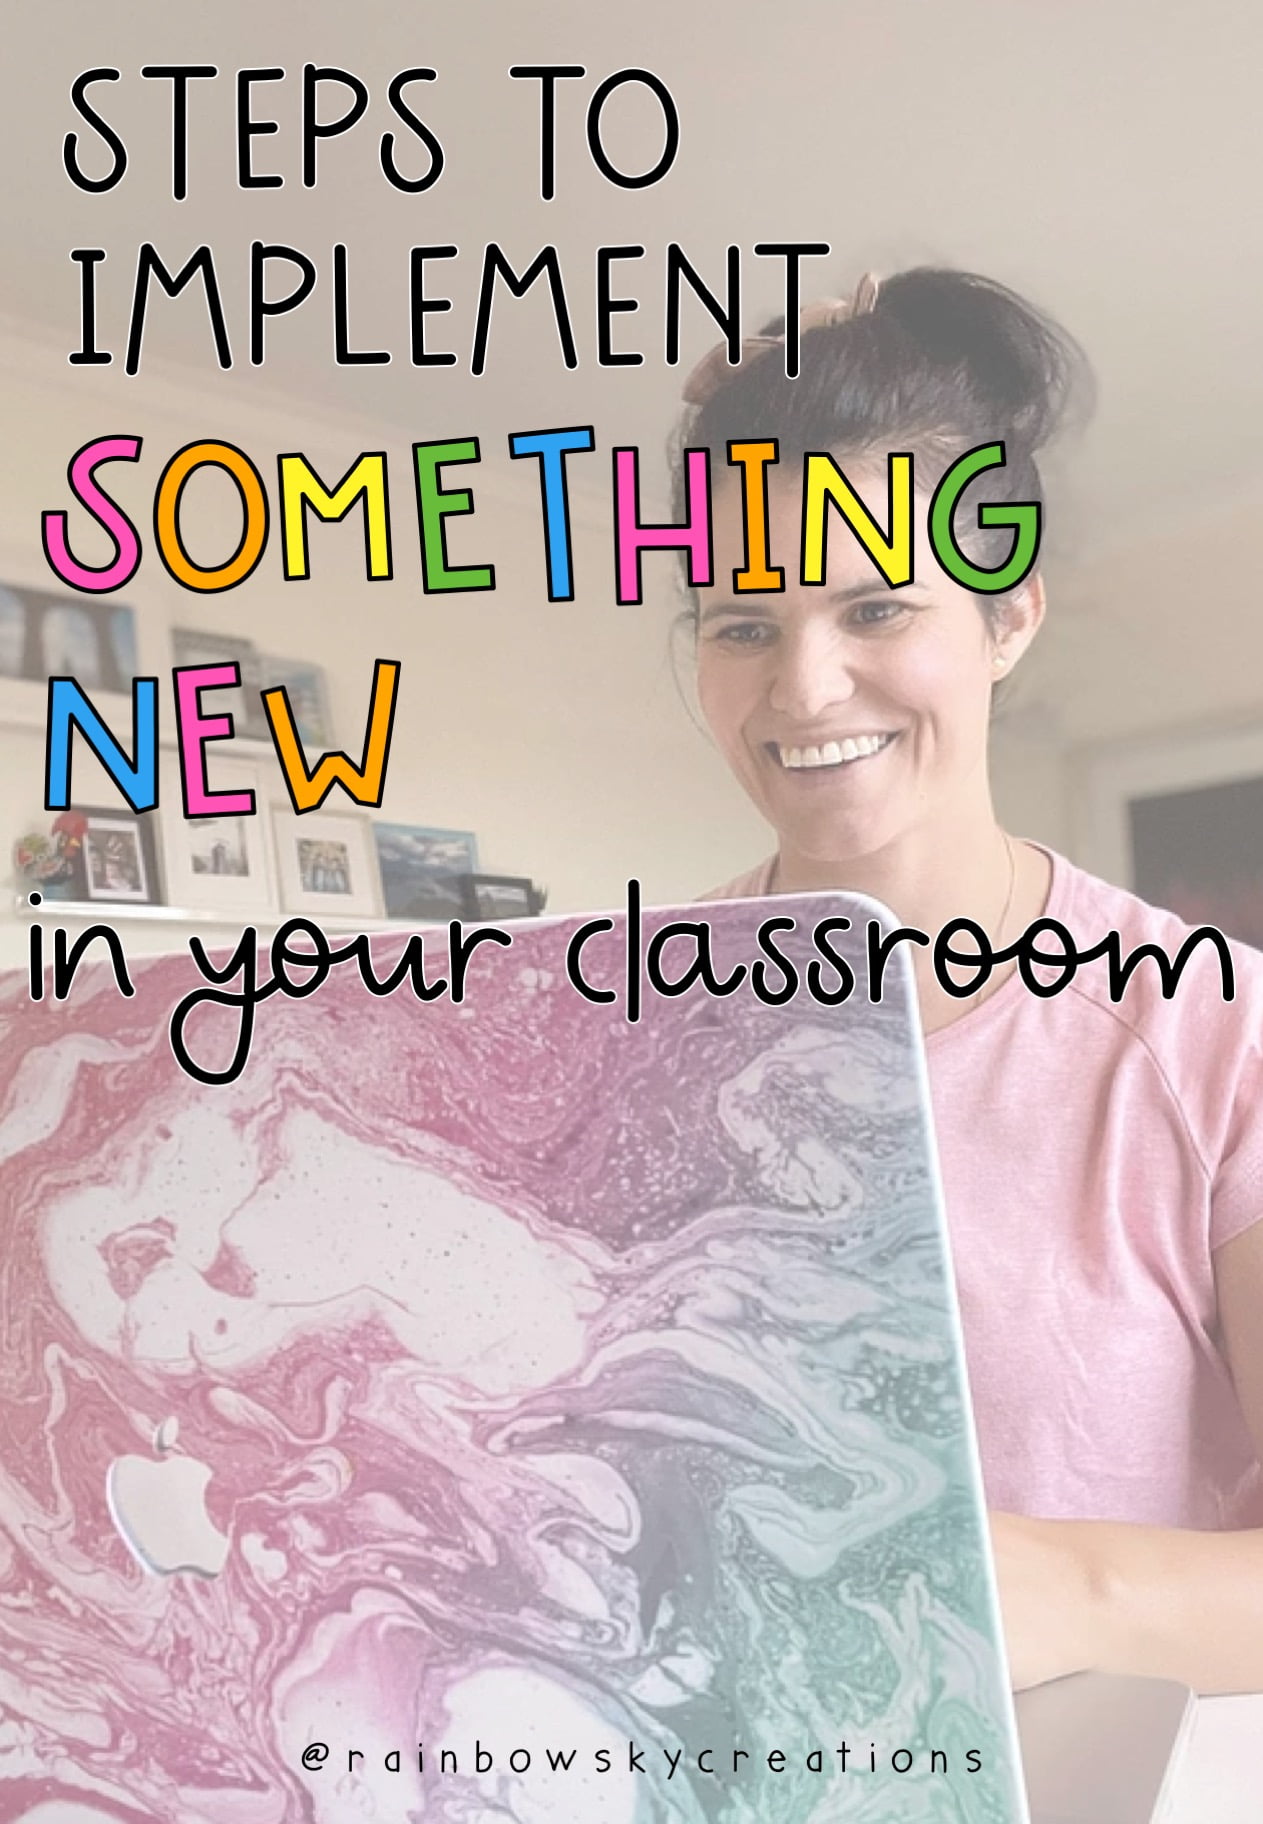 How to Implement Something New in the Classroom - Rainbow Sky Creations